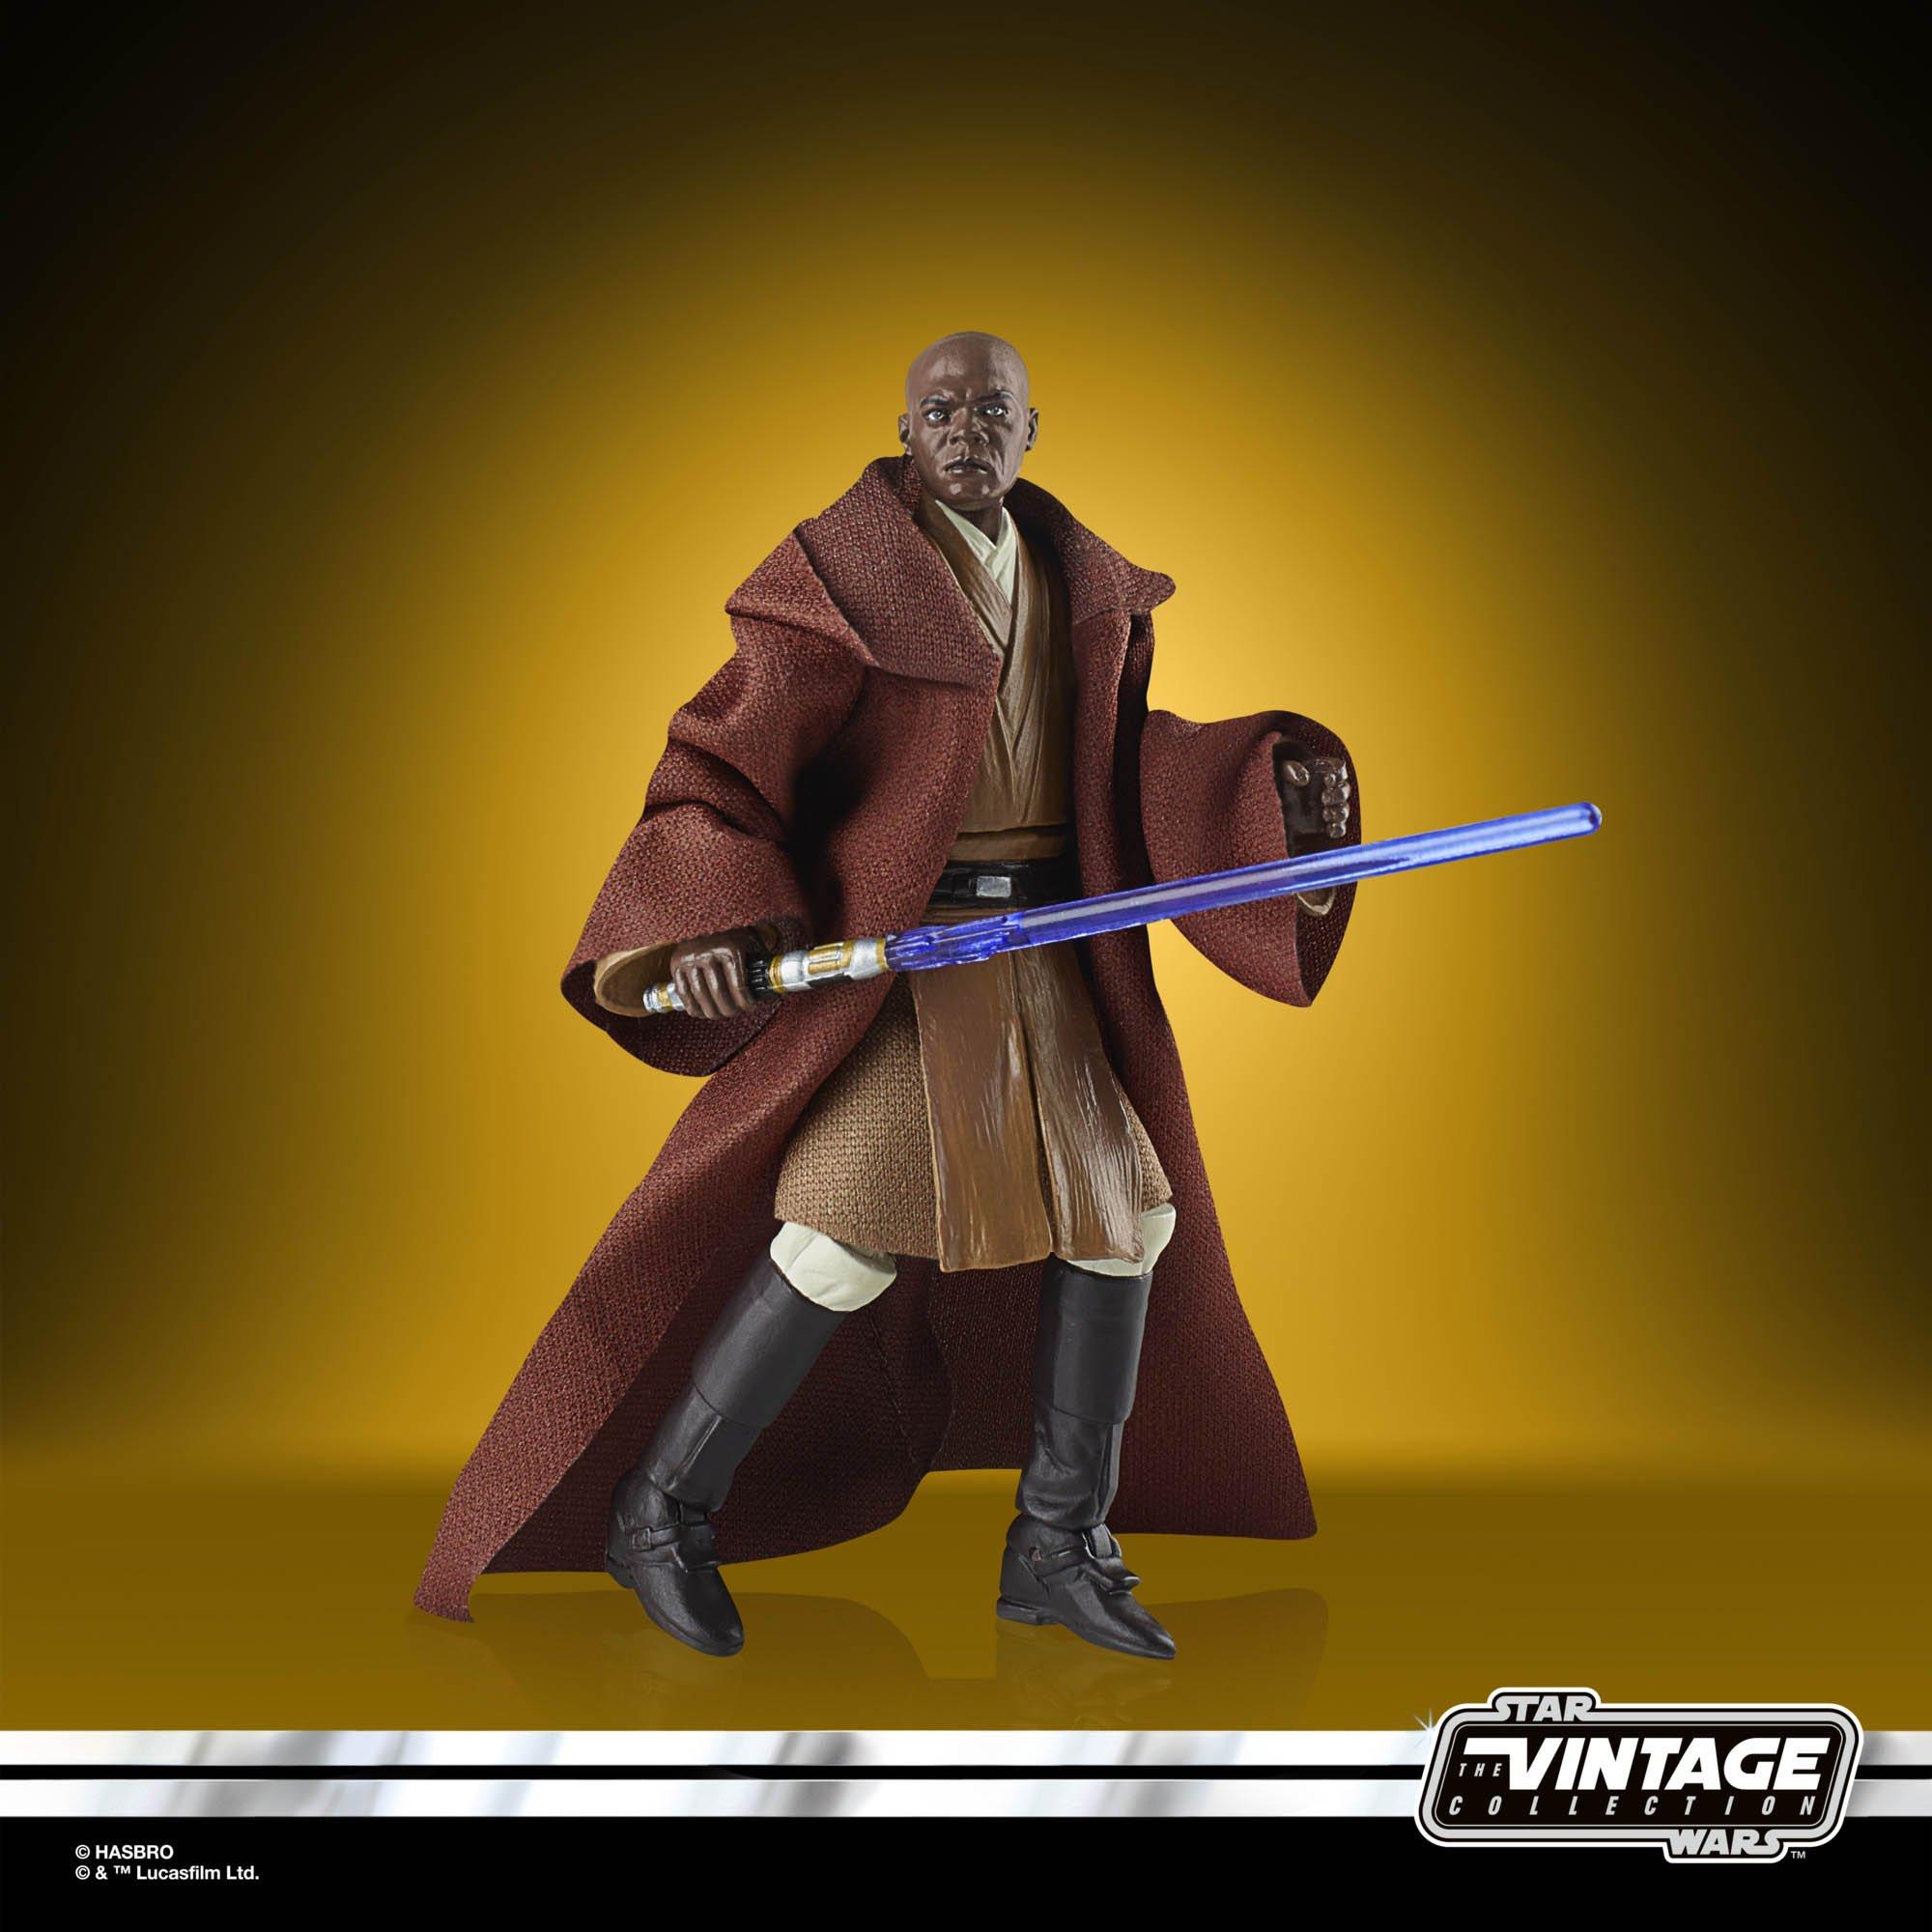 Hasbro Star Wars The Vintage Collection Star Wars: Attack of the Clones Mace Windu 3.75-in Action Figure